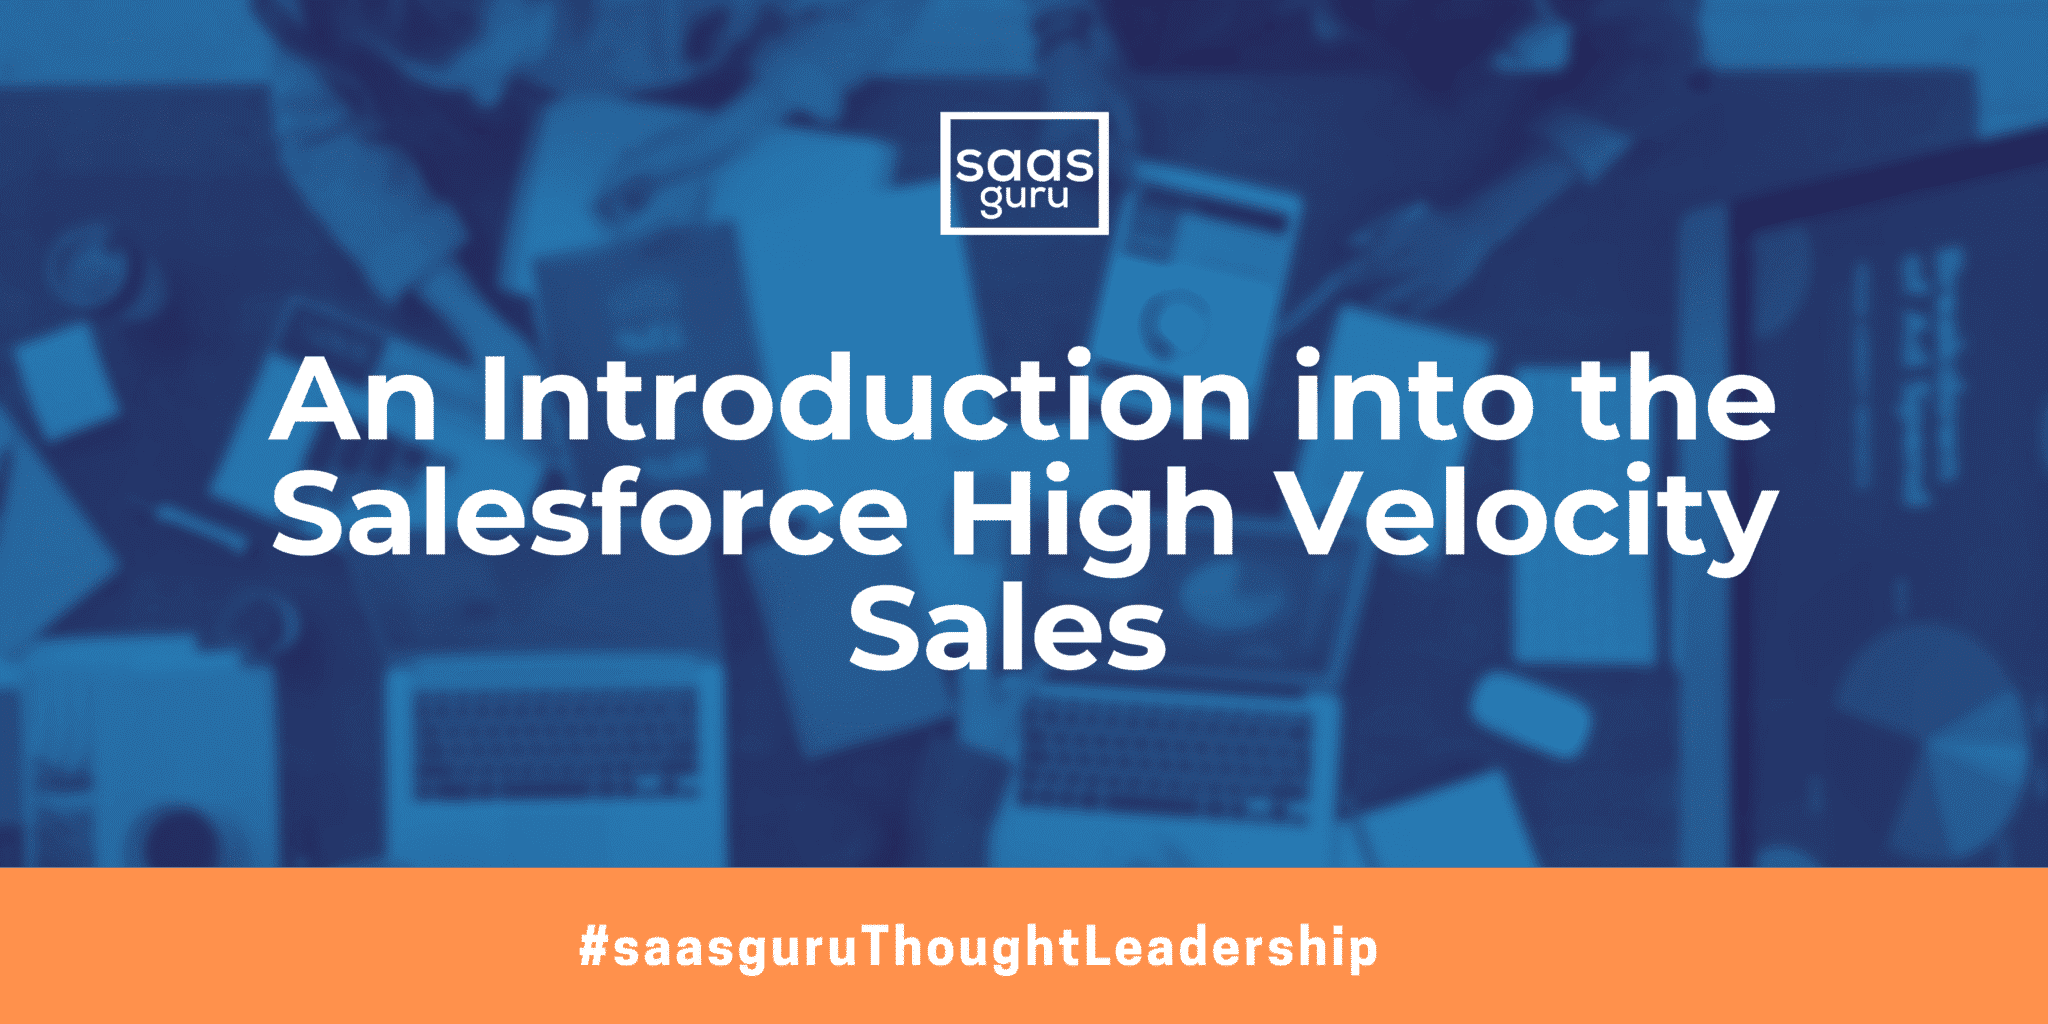 An Introduction into the Salesforce High Velocity Sales - Blog